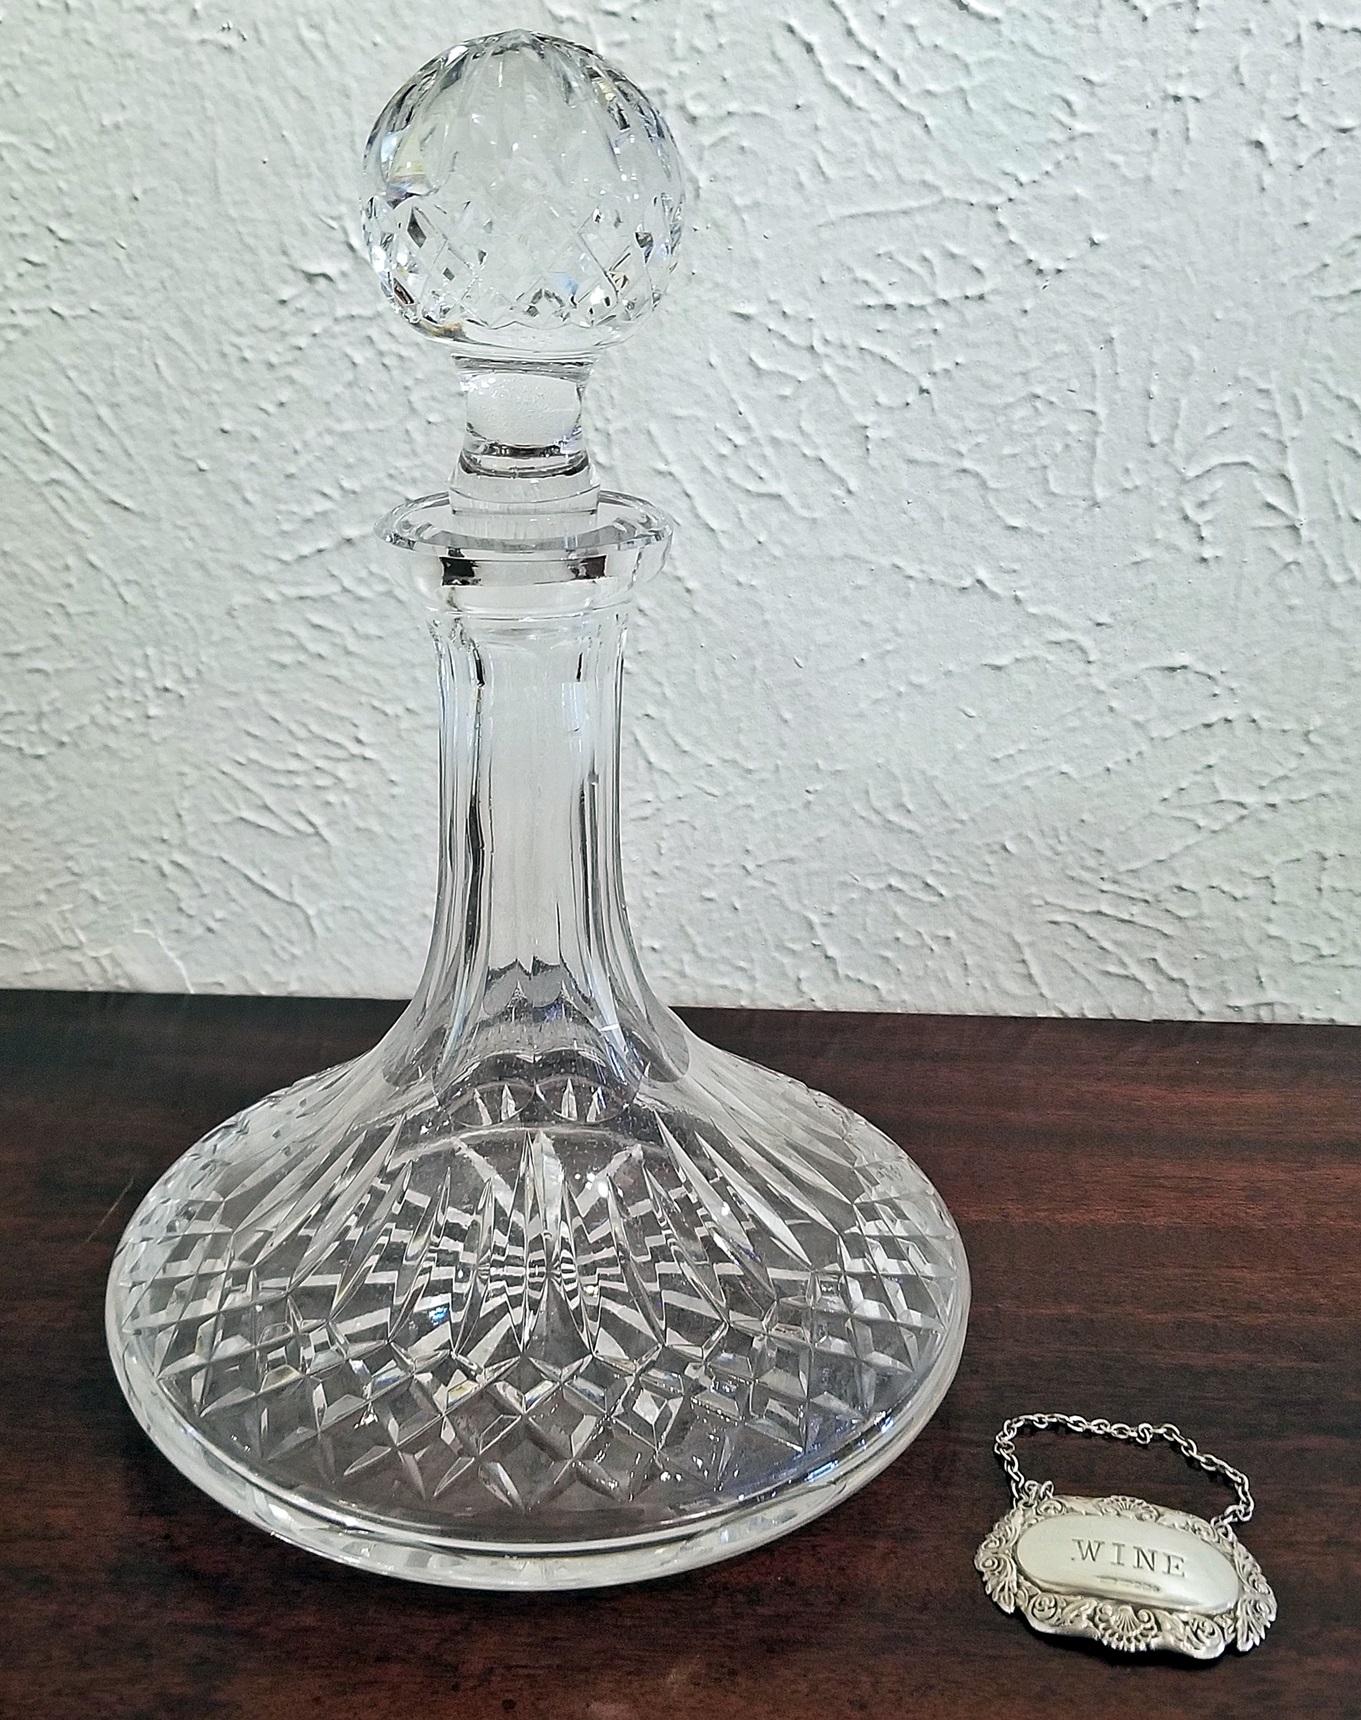 Beautiful vintage Waterford Crystal Ship’s decanter (Lismore pattern) from circa 1950, with solid (sterling) silver “Wine” Label.

The wine label is fully hallmarked, British, Birmingham, letter ‘g’ for 1906.

In perfect condition with no chips